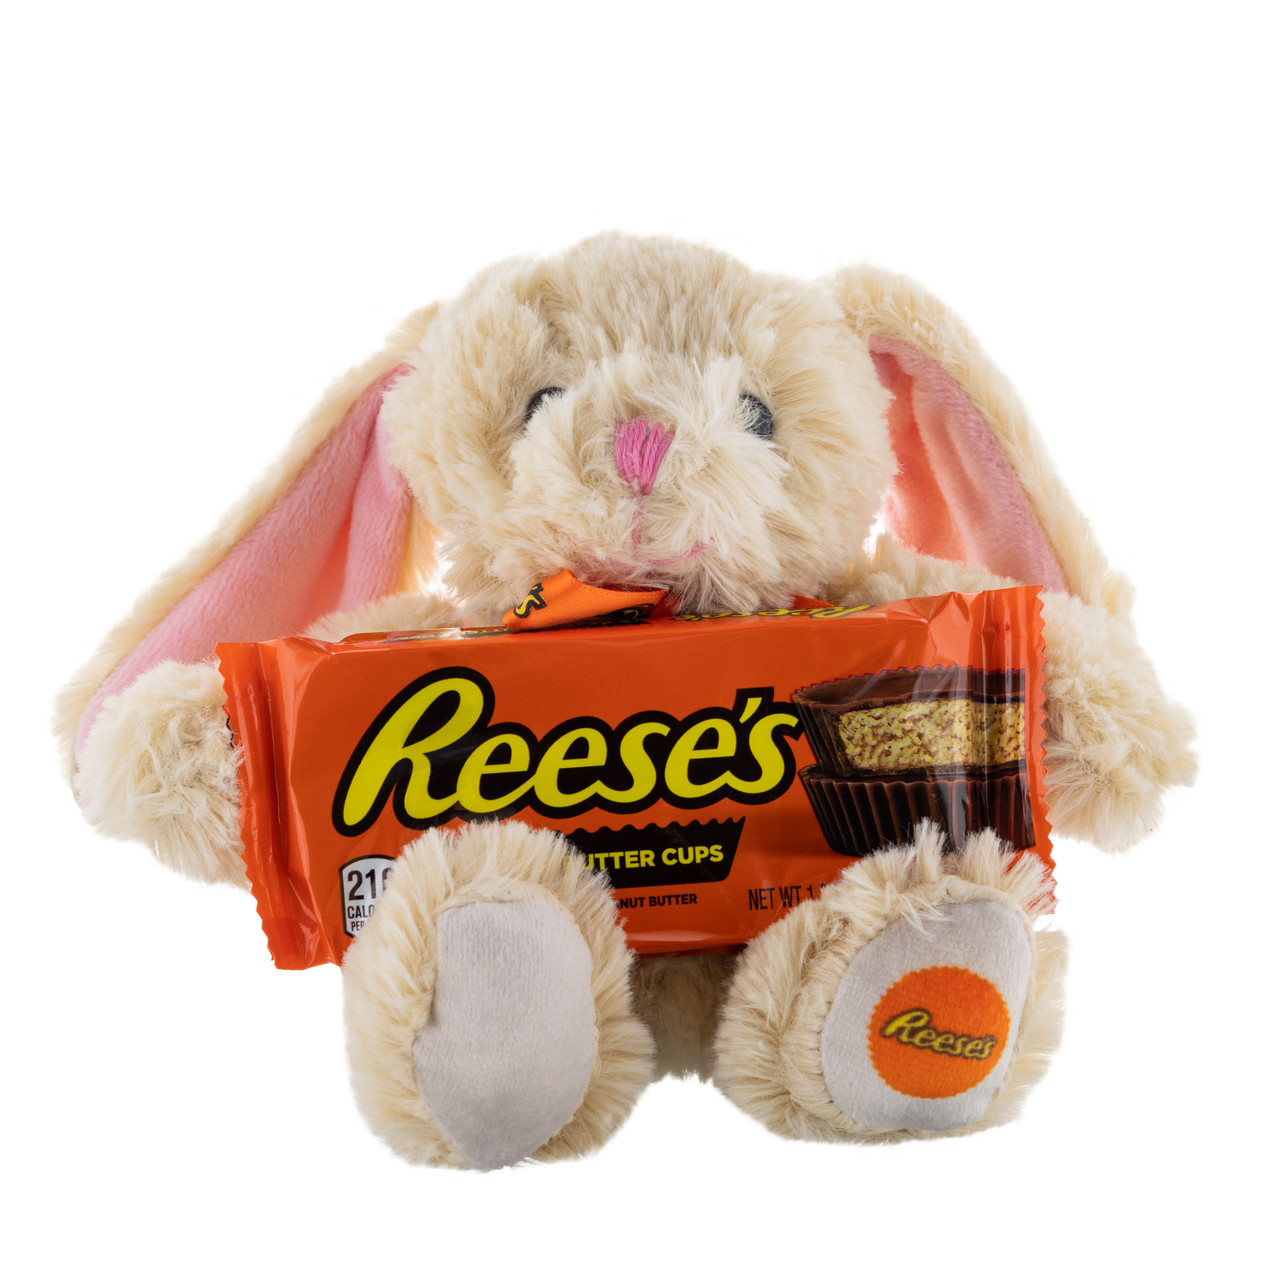 Reese's Long Ear Bunny Plush with Chocolate Bar (Case of 6)